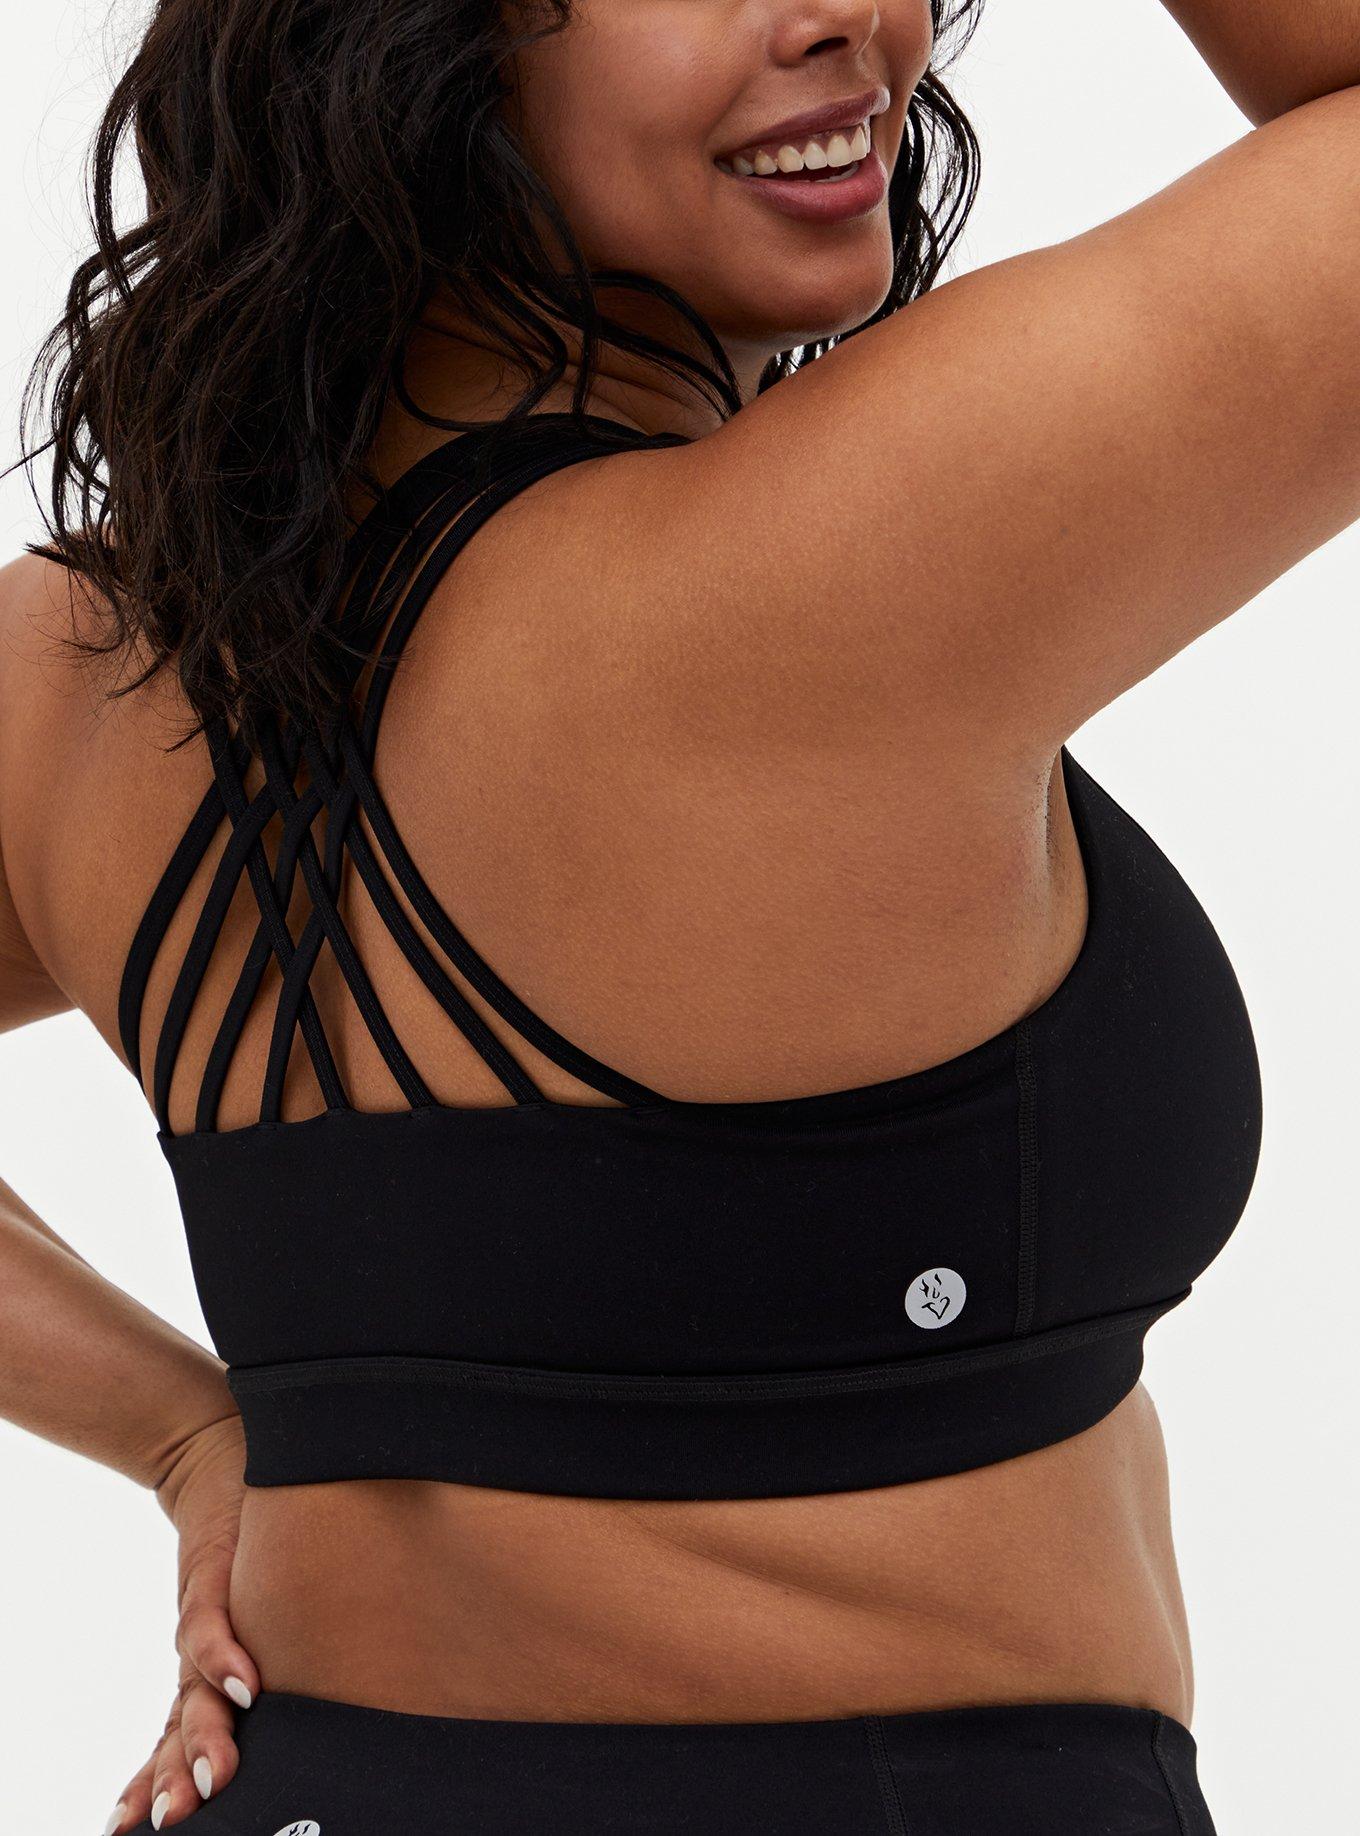 This super popular Lululemon top 'doesn't give you uniboob' — and it's $54  this week!